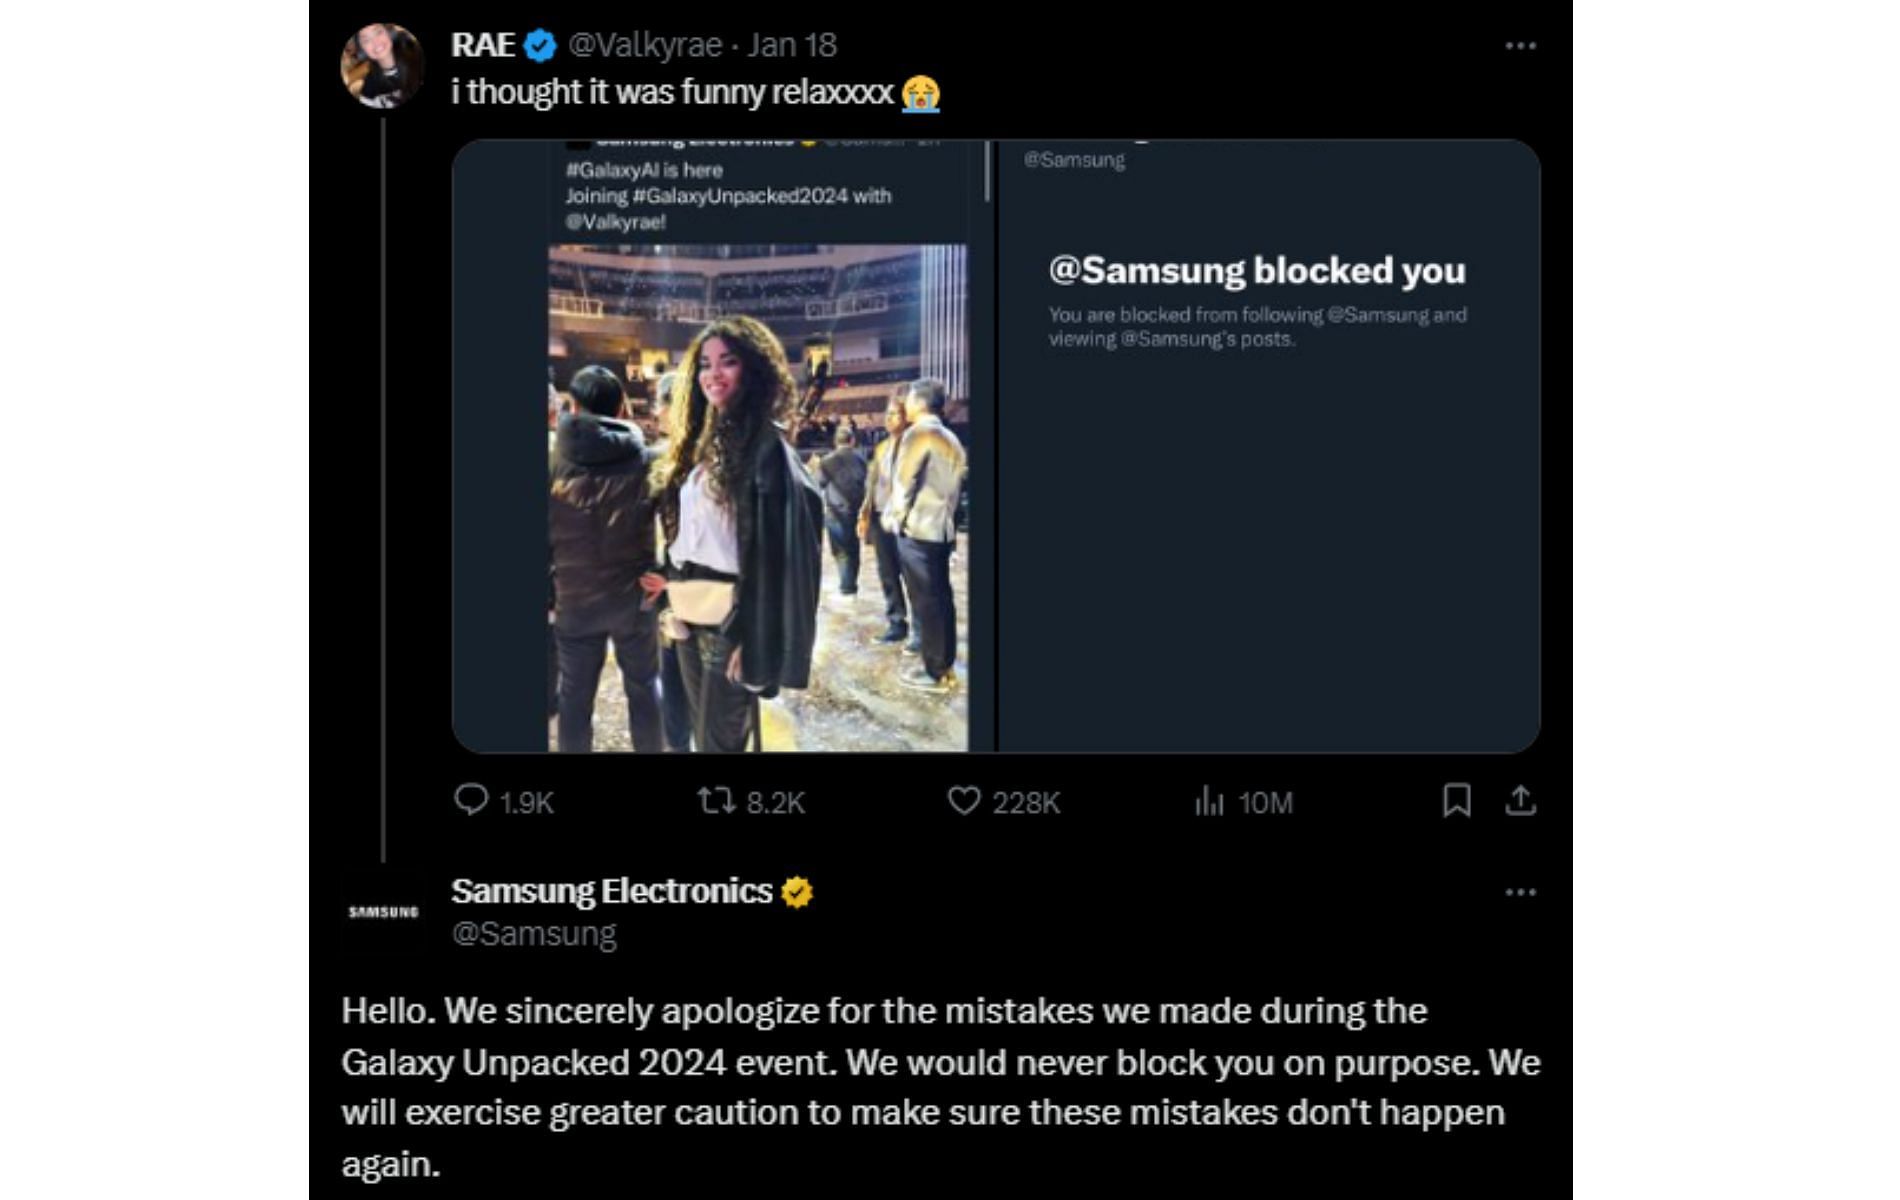 Samsung posts its apology following the mistaken identity (Image via X/@Samsung)